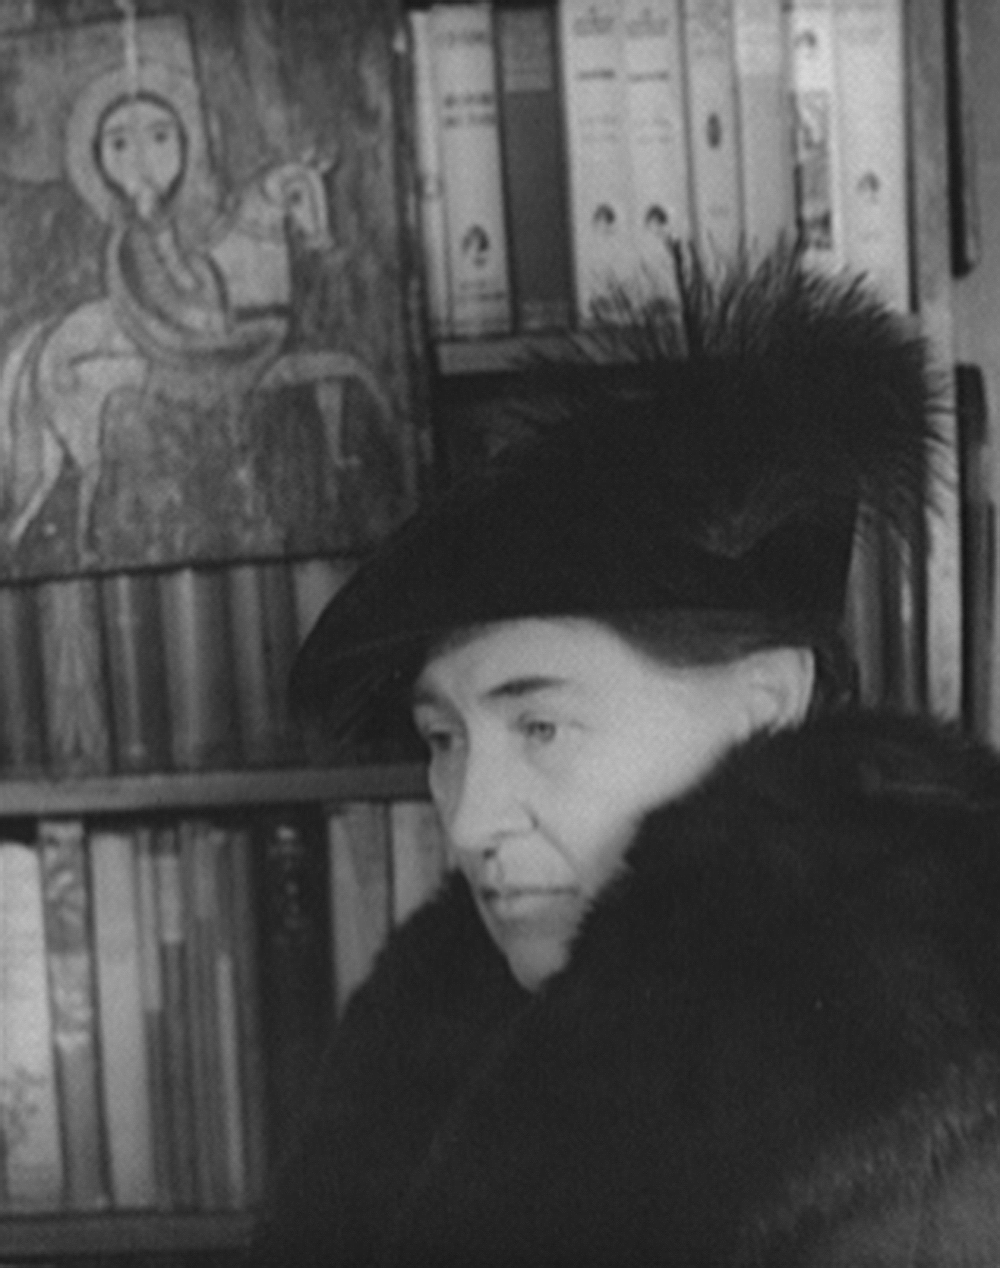 Willa Cather, 1936. Photograph by Carl Van Vechten. Library of Congress, Prints and Photographs Division, Carl Van Vechten Collection.